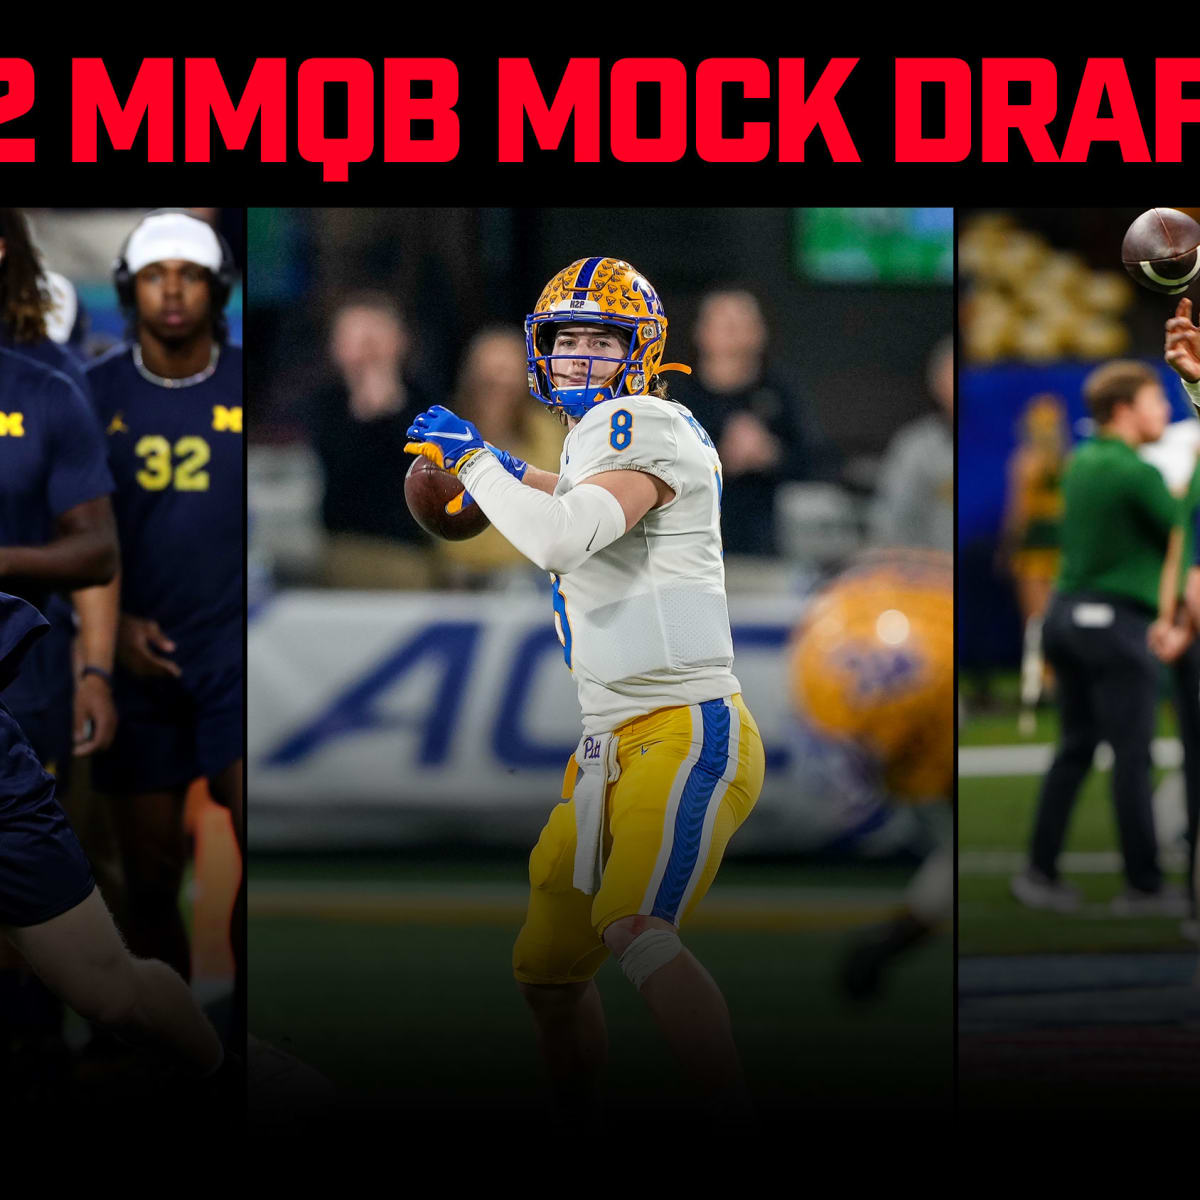 NFL Mock Draft 2022: Complete 7-round edition gives Seahawks, Steelers,  Eagles new QBs with Day 1 picks